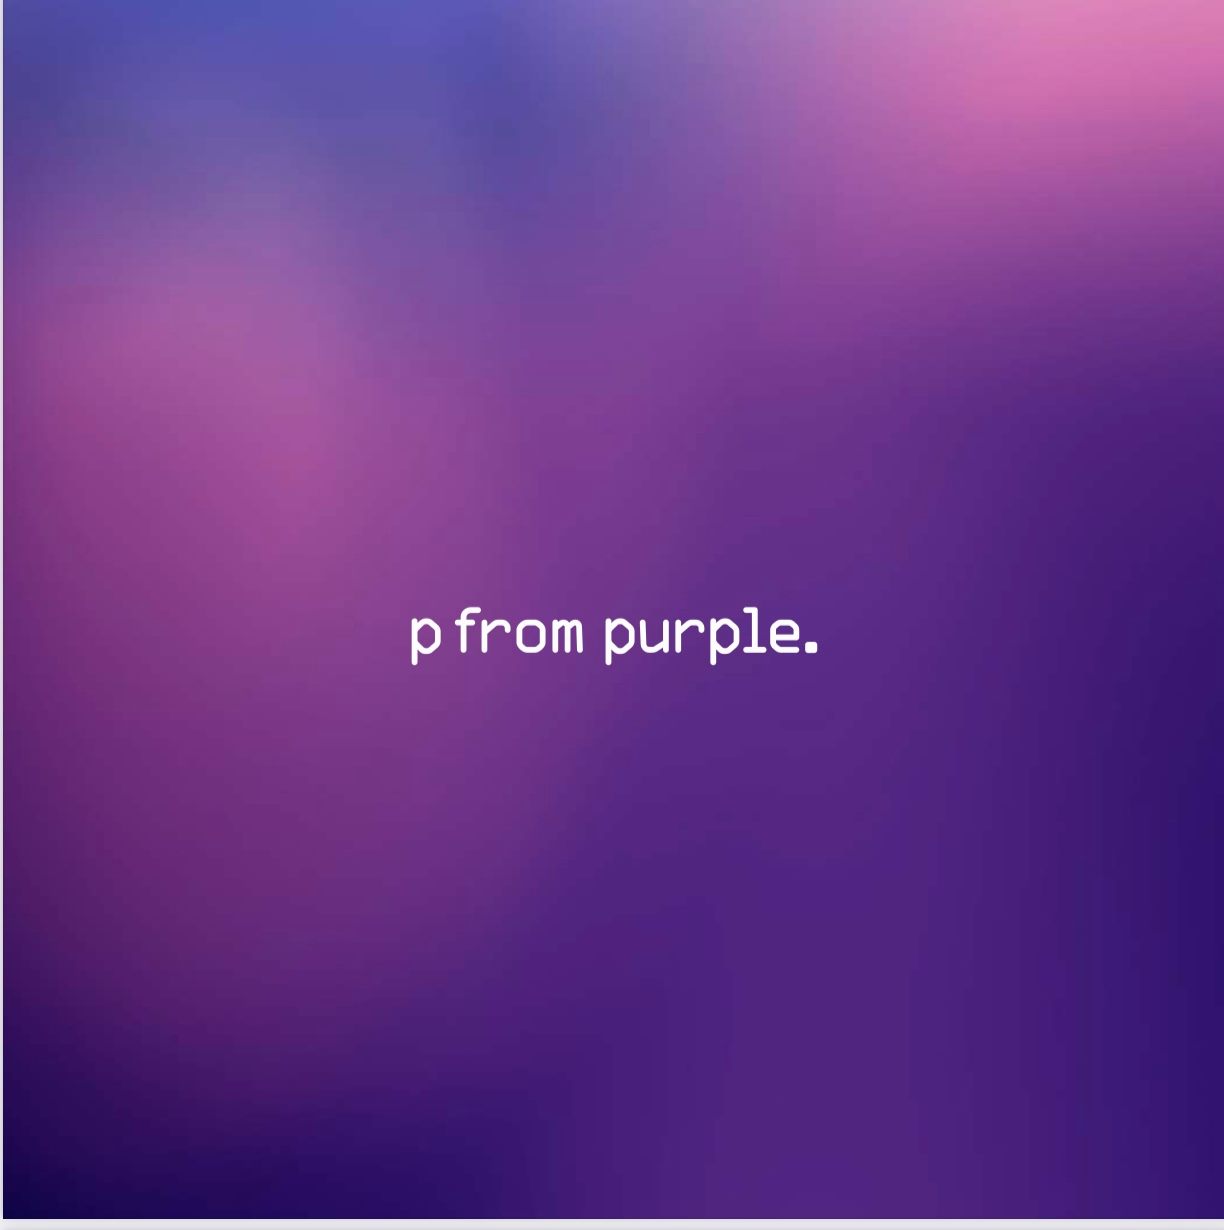 p from purple